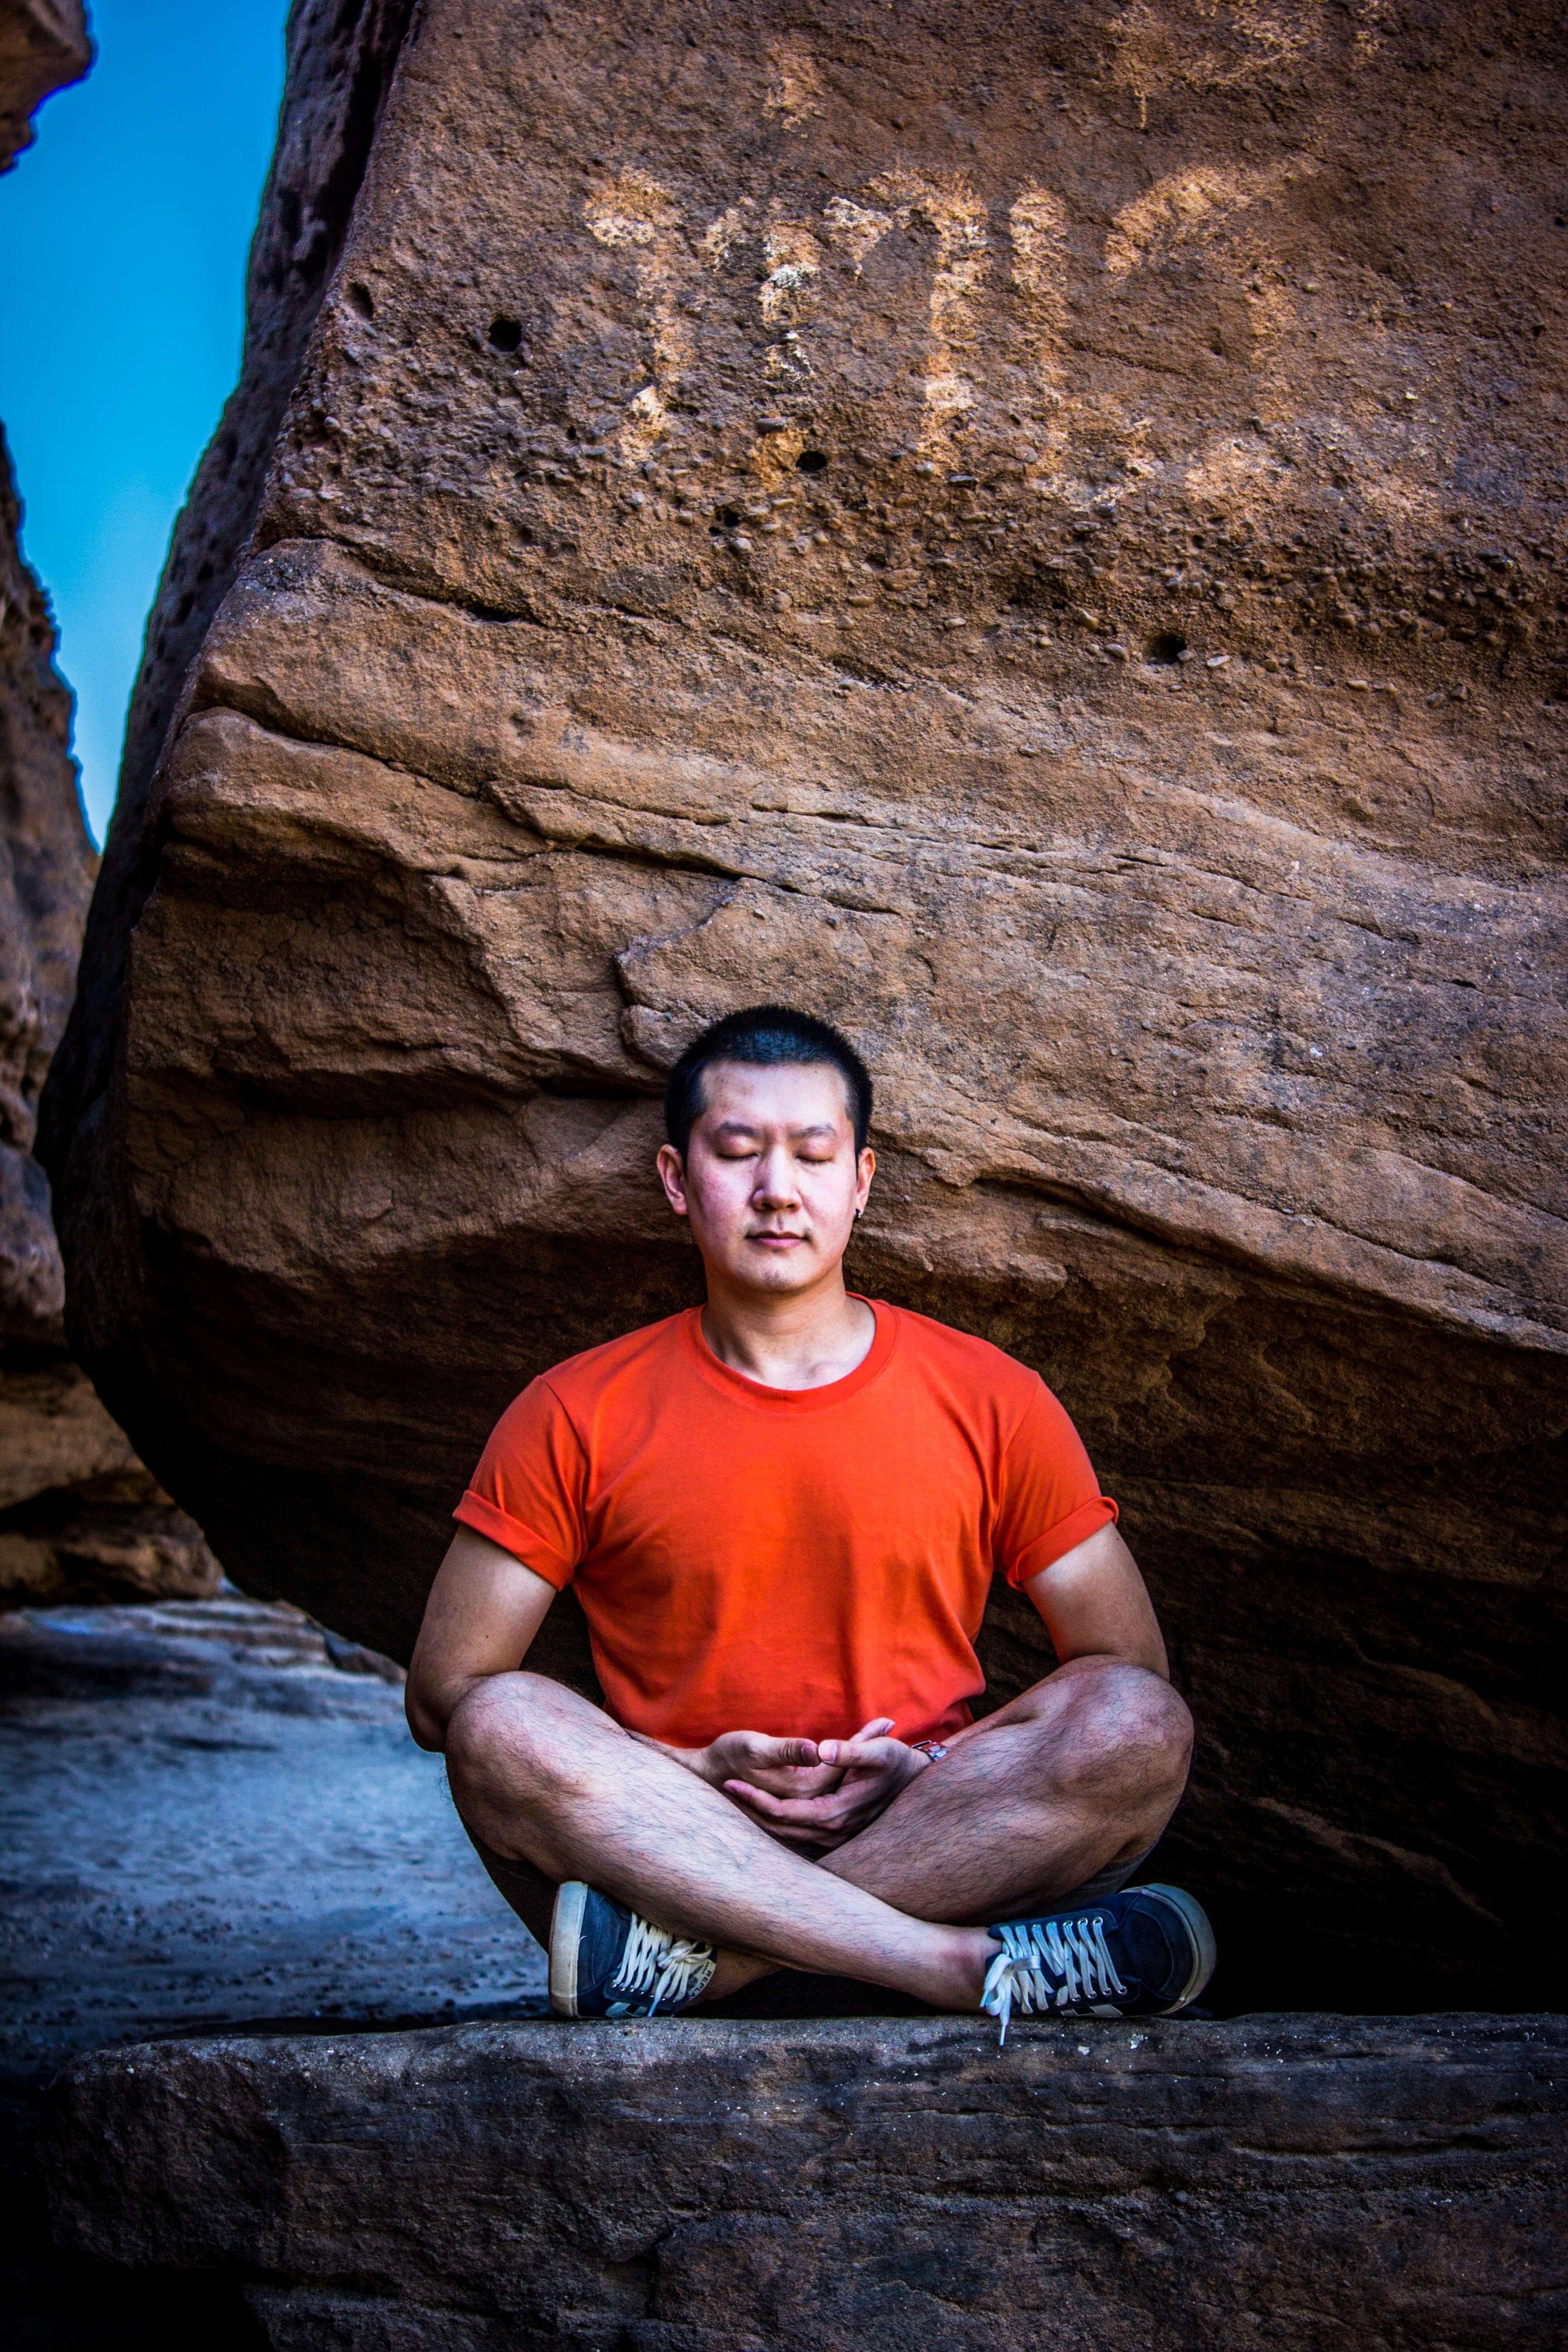 How to get the benefits of meditation — without actually meditating